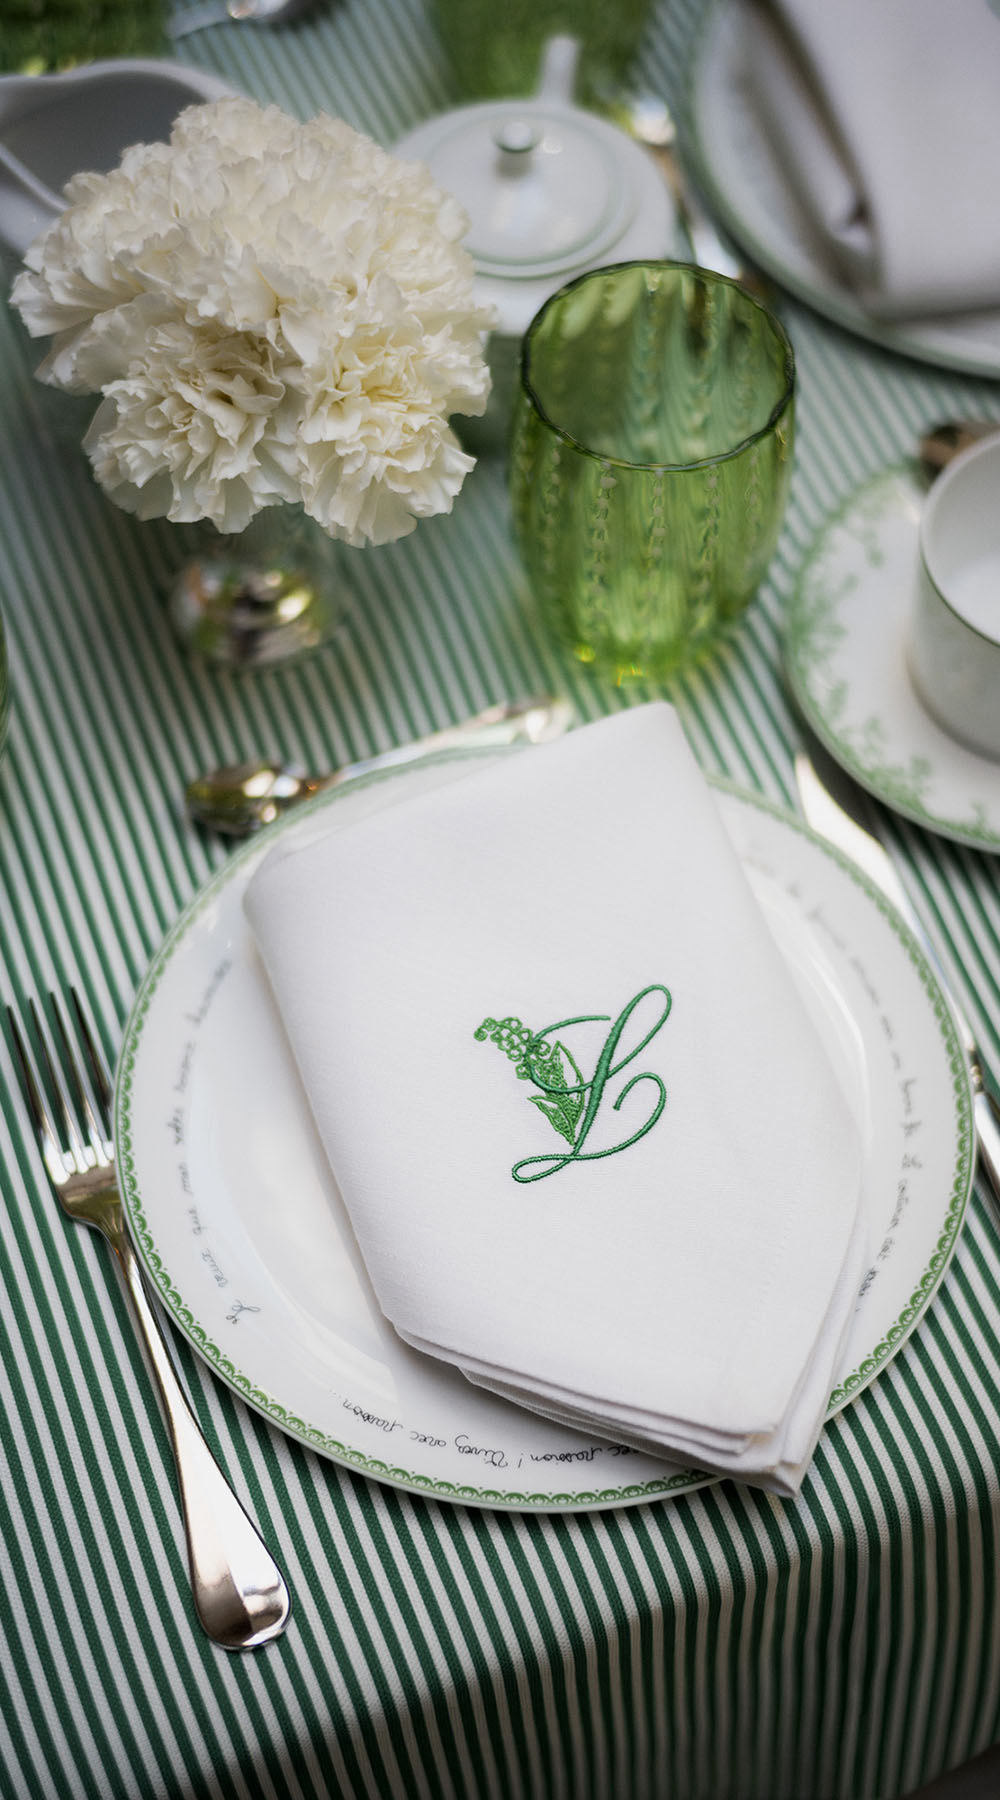 Dior Maison’s Lily of the Valley Tea Service at the Lowell in New York